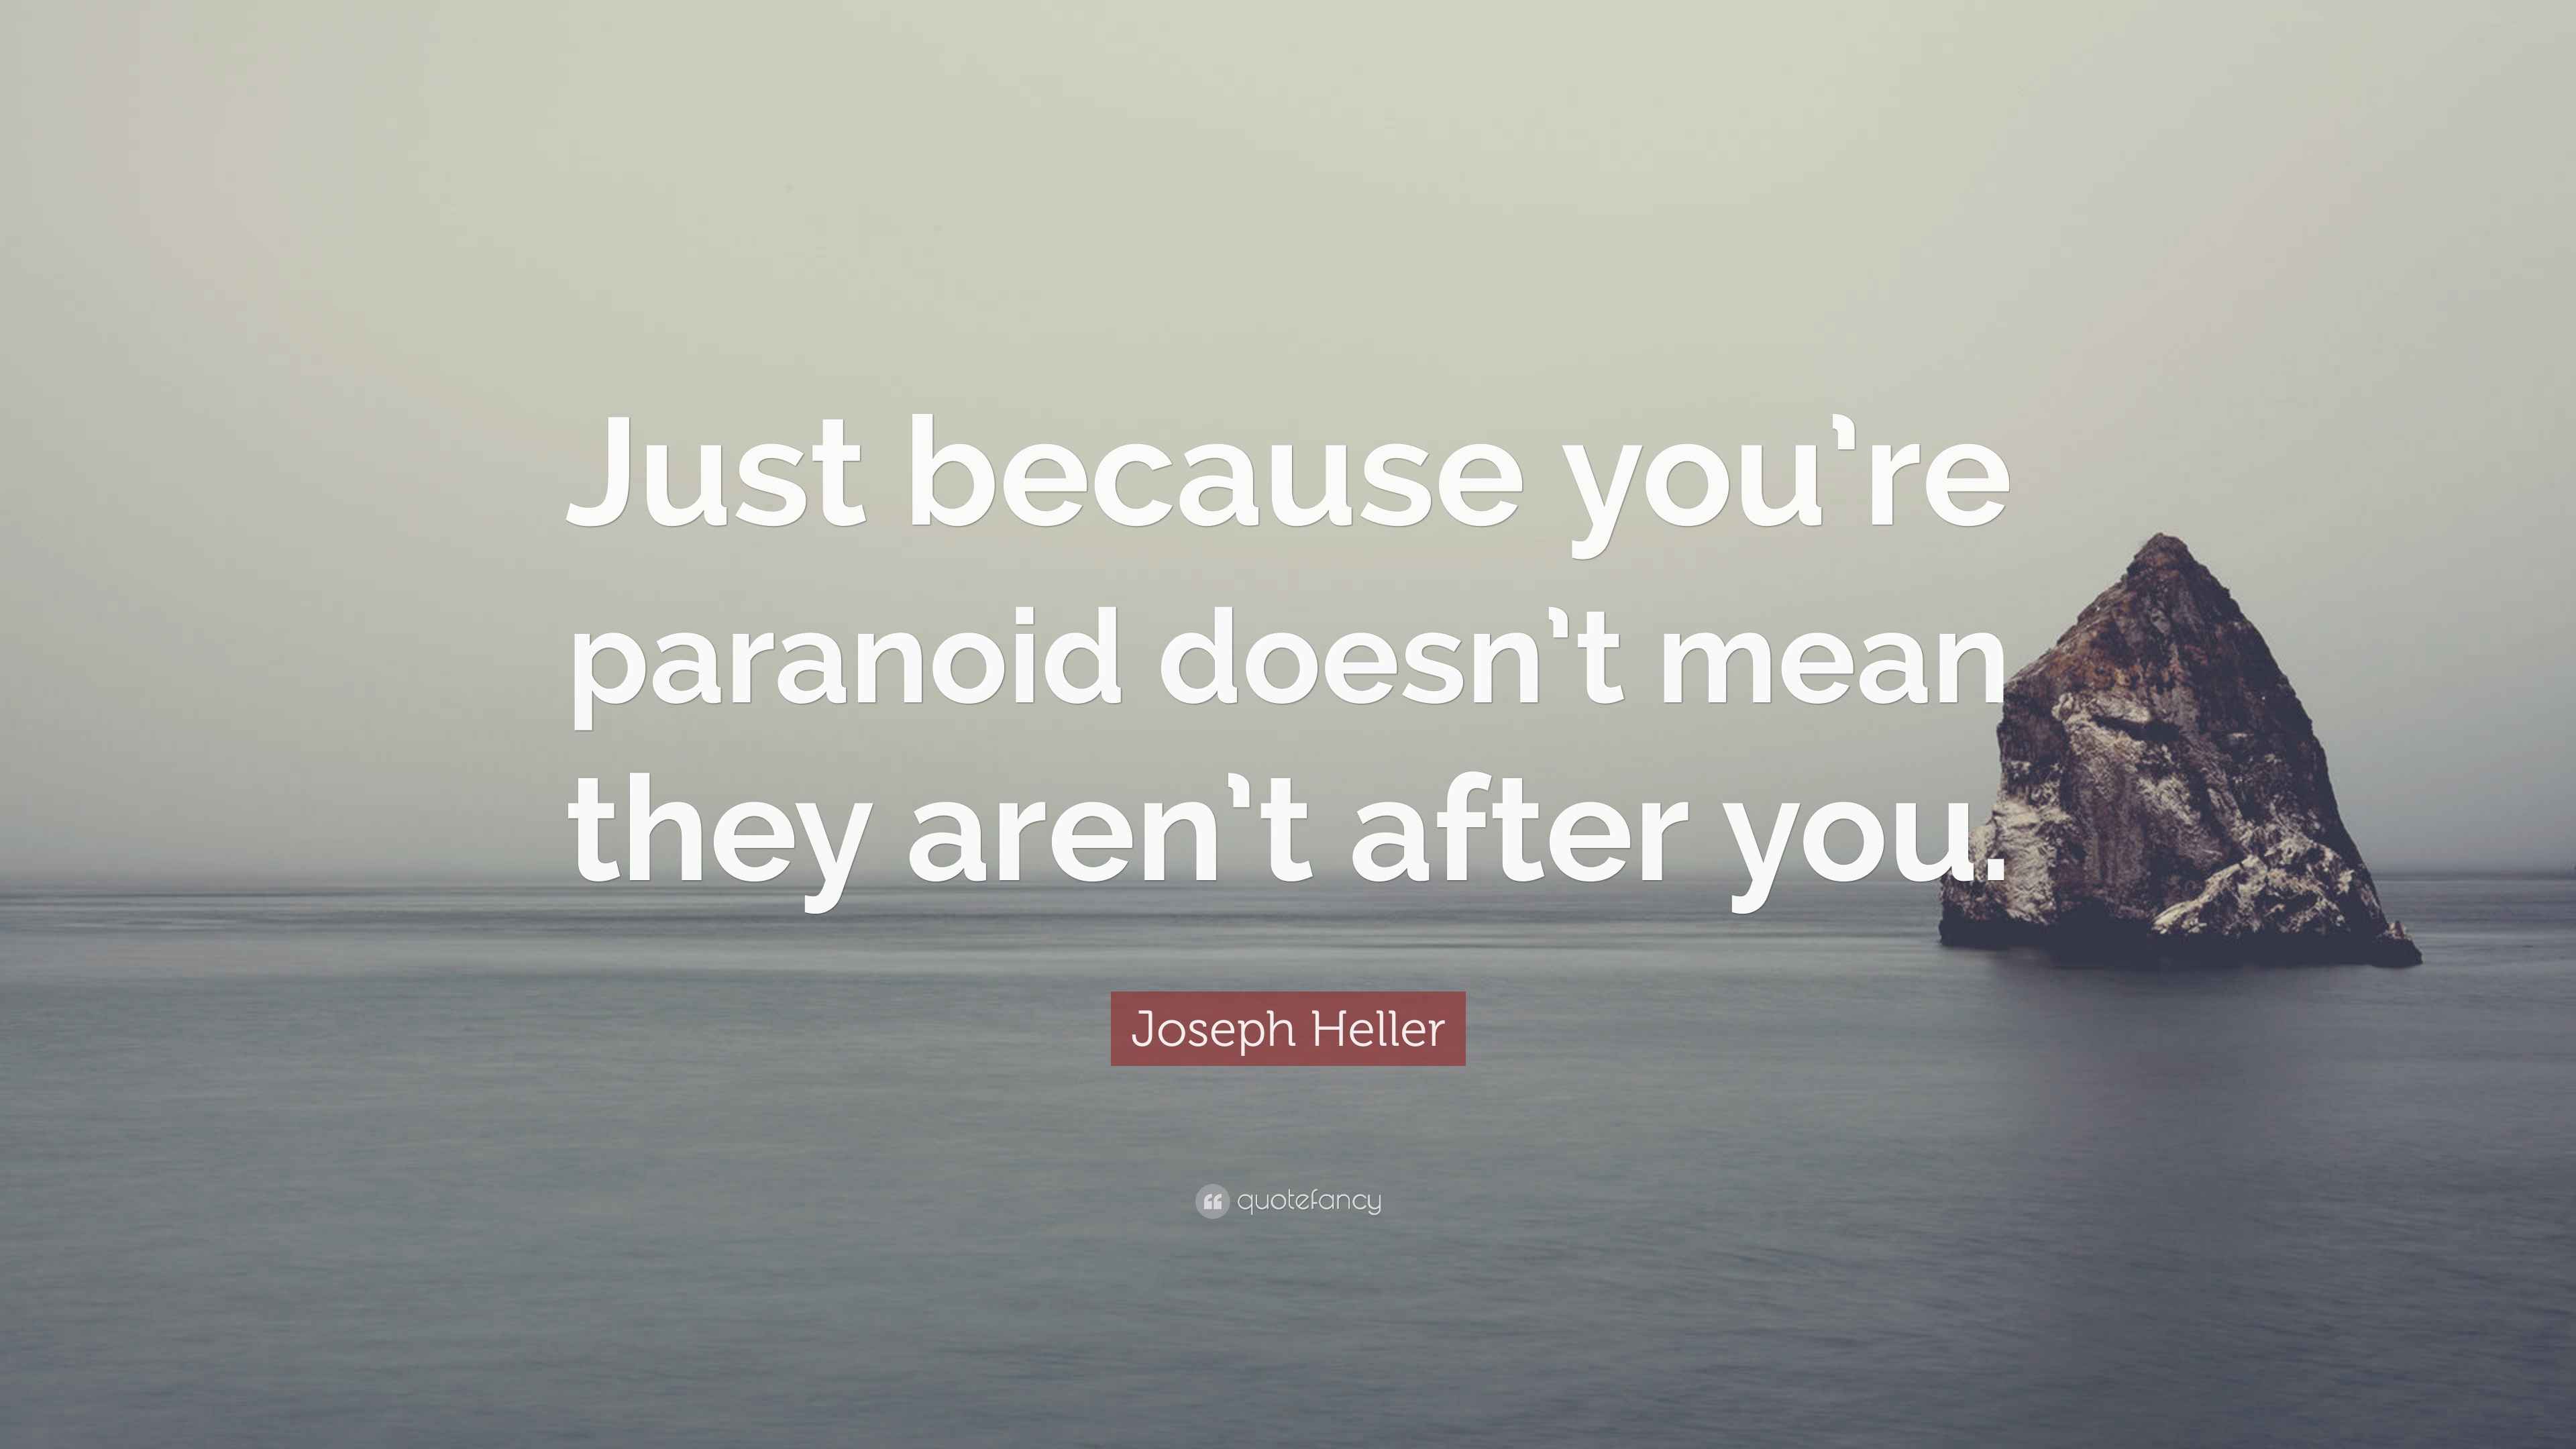 Joseph Heller Quote “just Because Youre Paranoid Doesnt Mean They